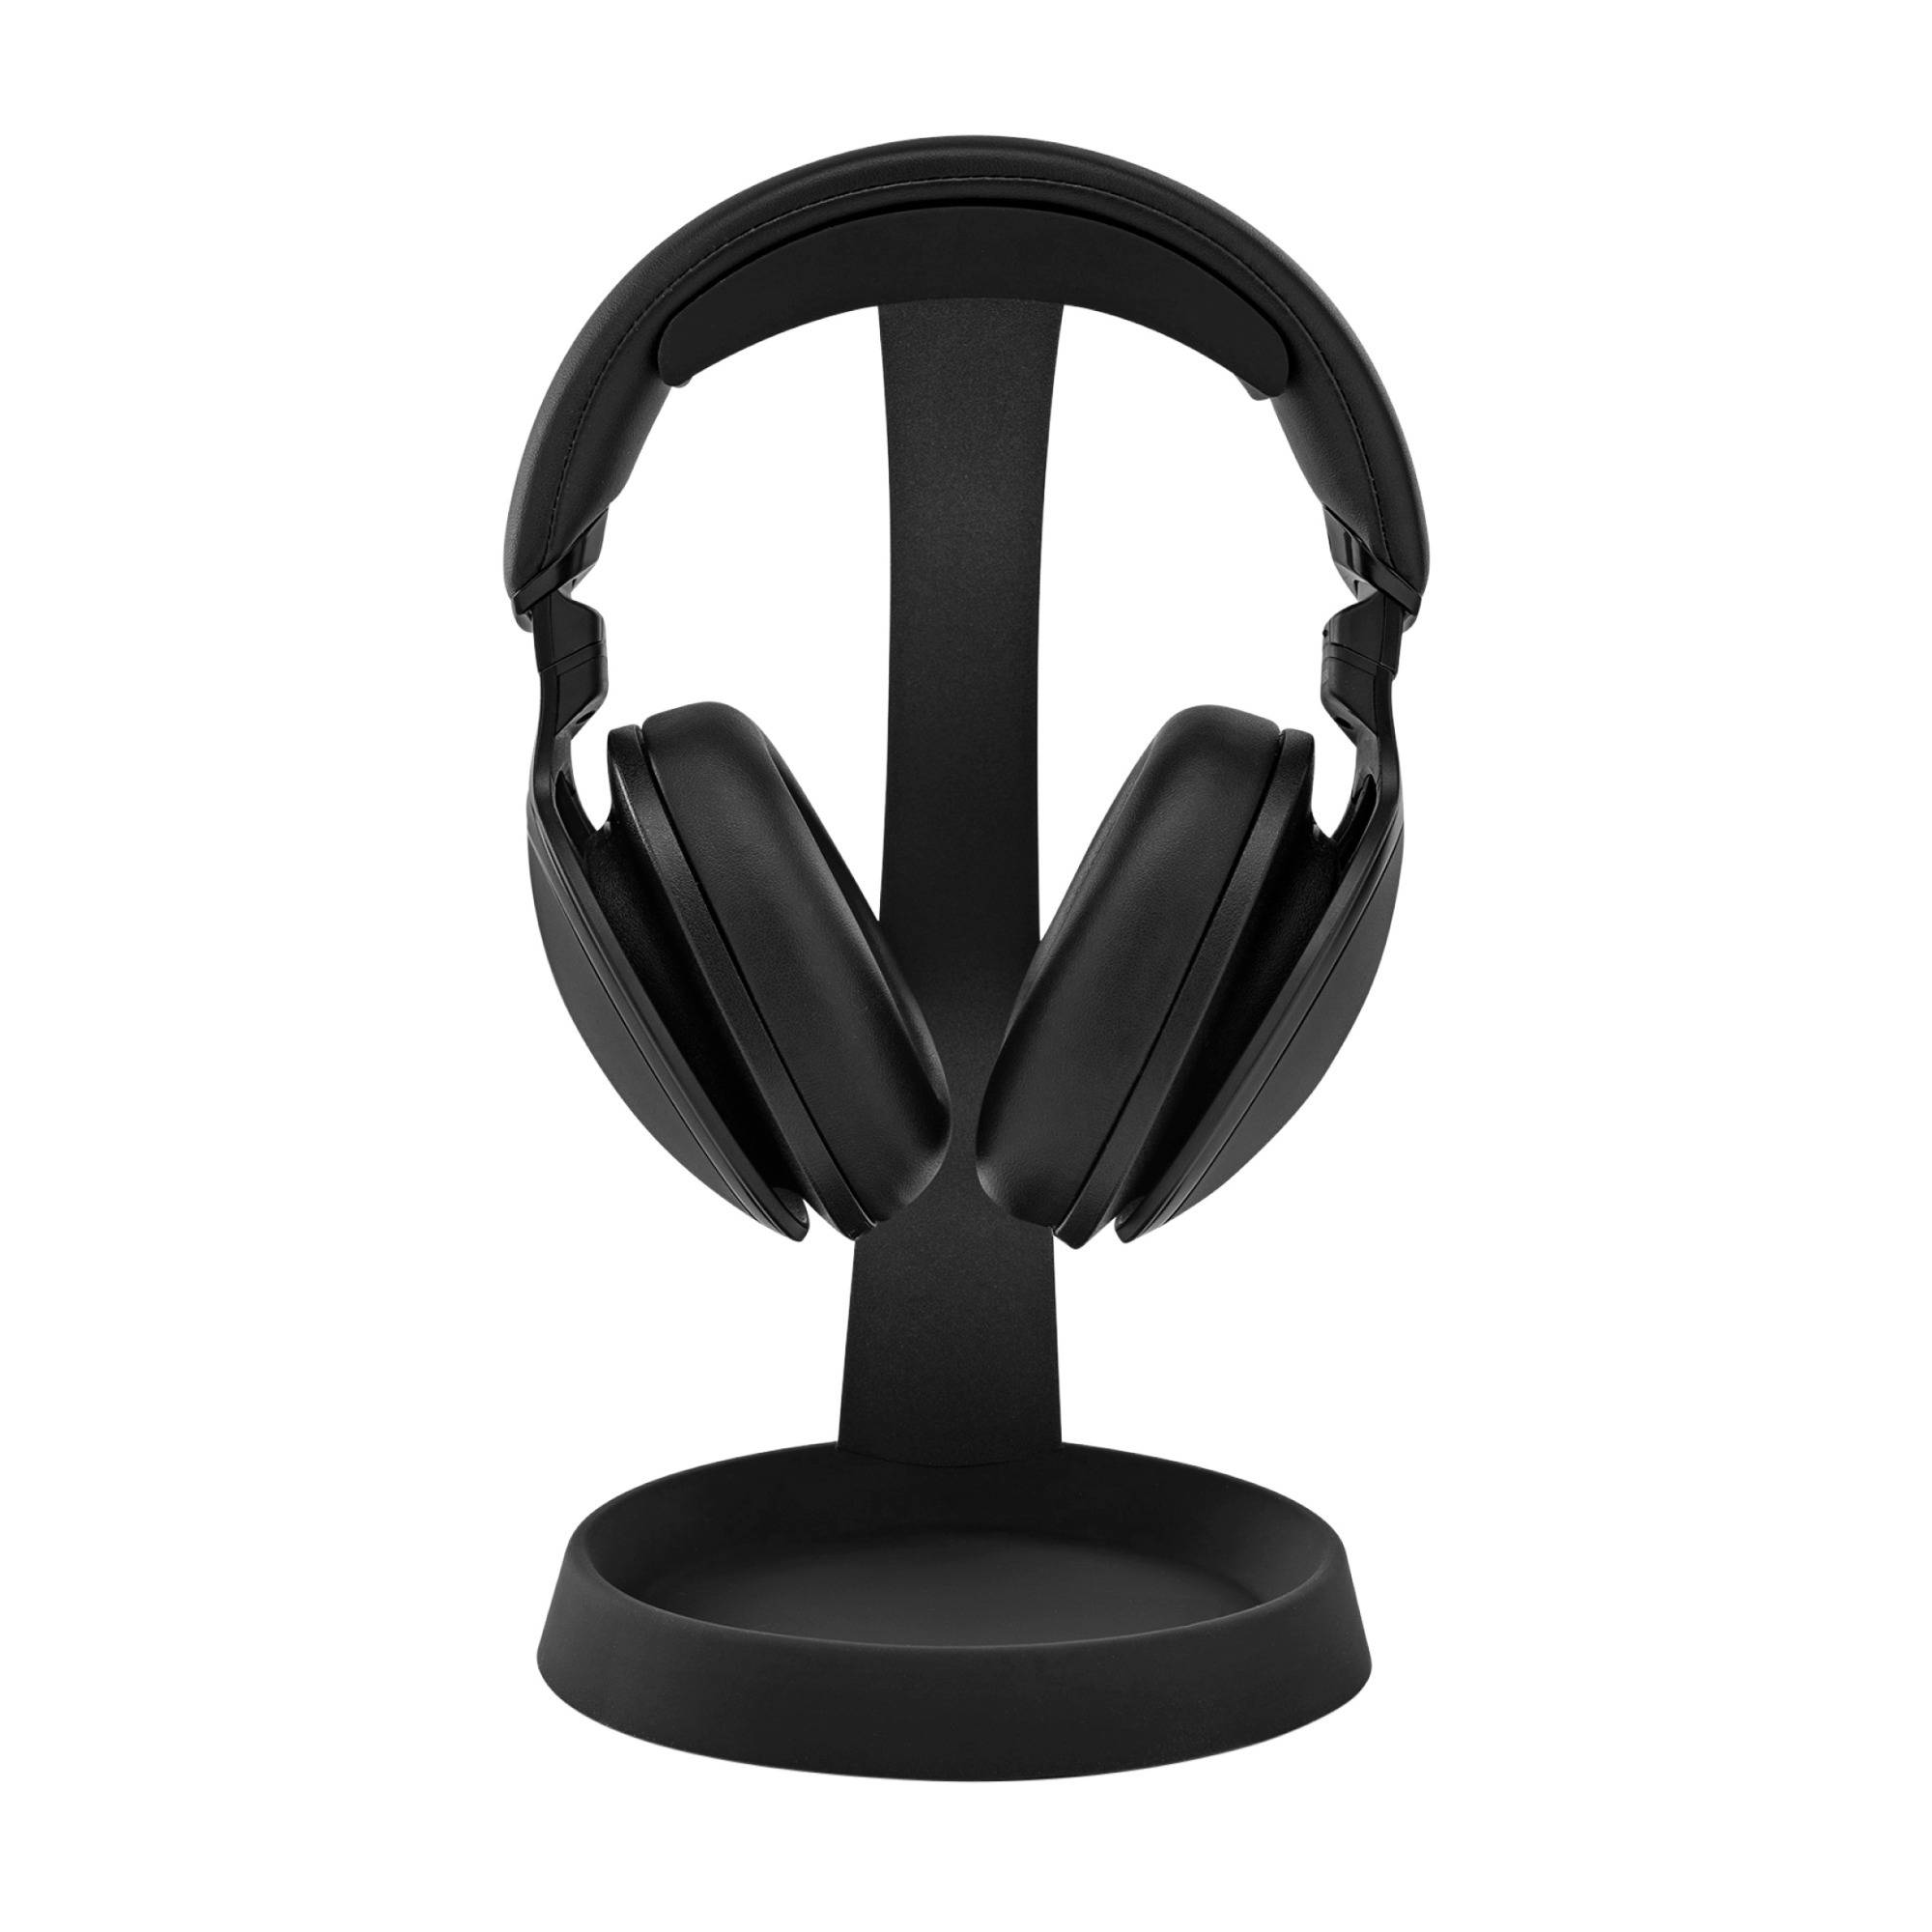 Knox Gear Aluminum Headphone Stand for Desk with Solid Base Mount (Black)